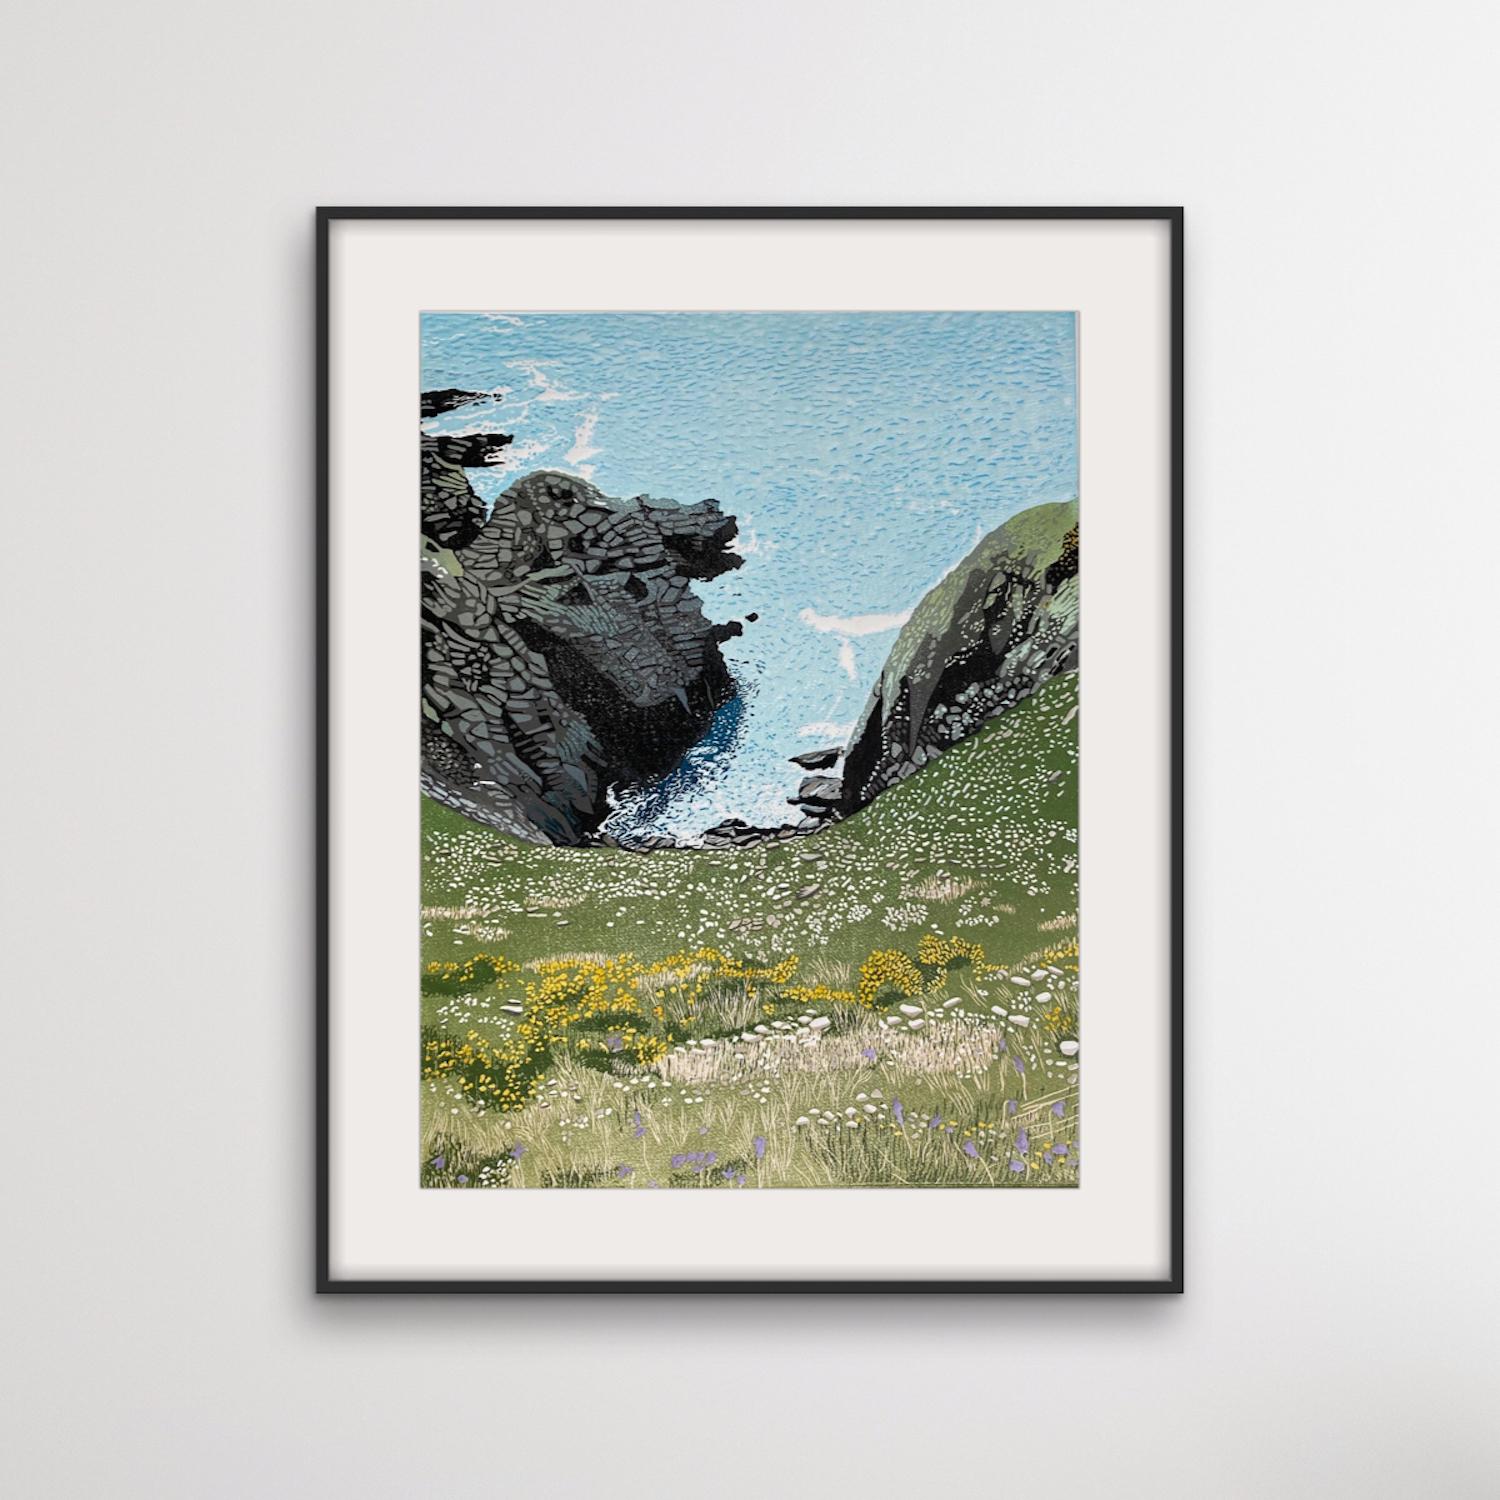 Cliff Edge by Ann Burnham [2022]
limited_edition and hand signed by the artist 
Linocut on paper 
Edition number 4
Image size: H:56cm cm x W:42cm cm
Complete Size of Unframed Work: H:76cm cm x W:54cm cm x D:2mmcm
Sold Unframed
Please note that